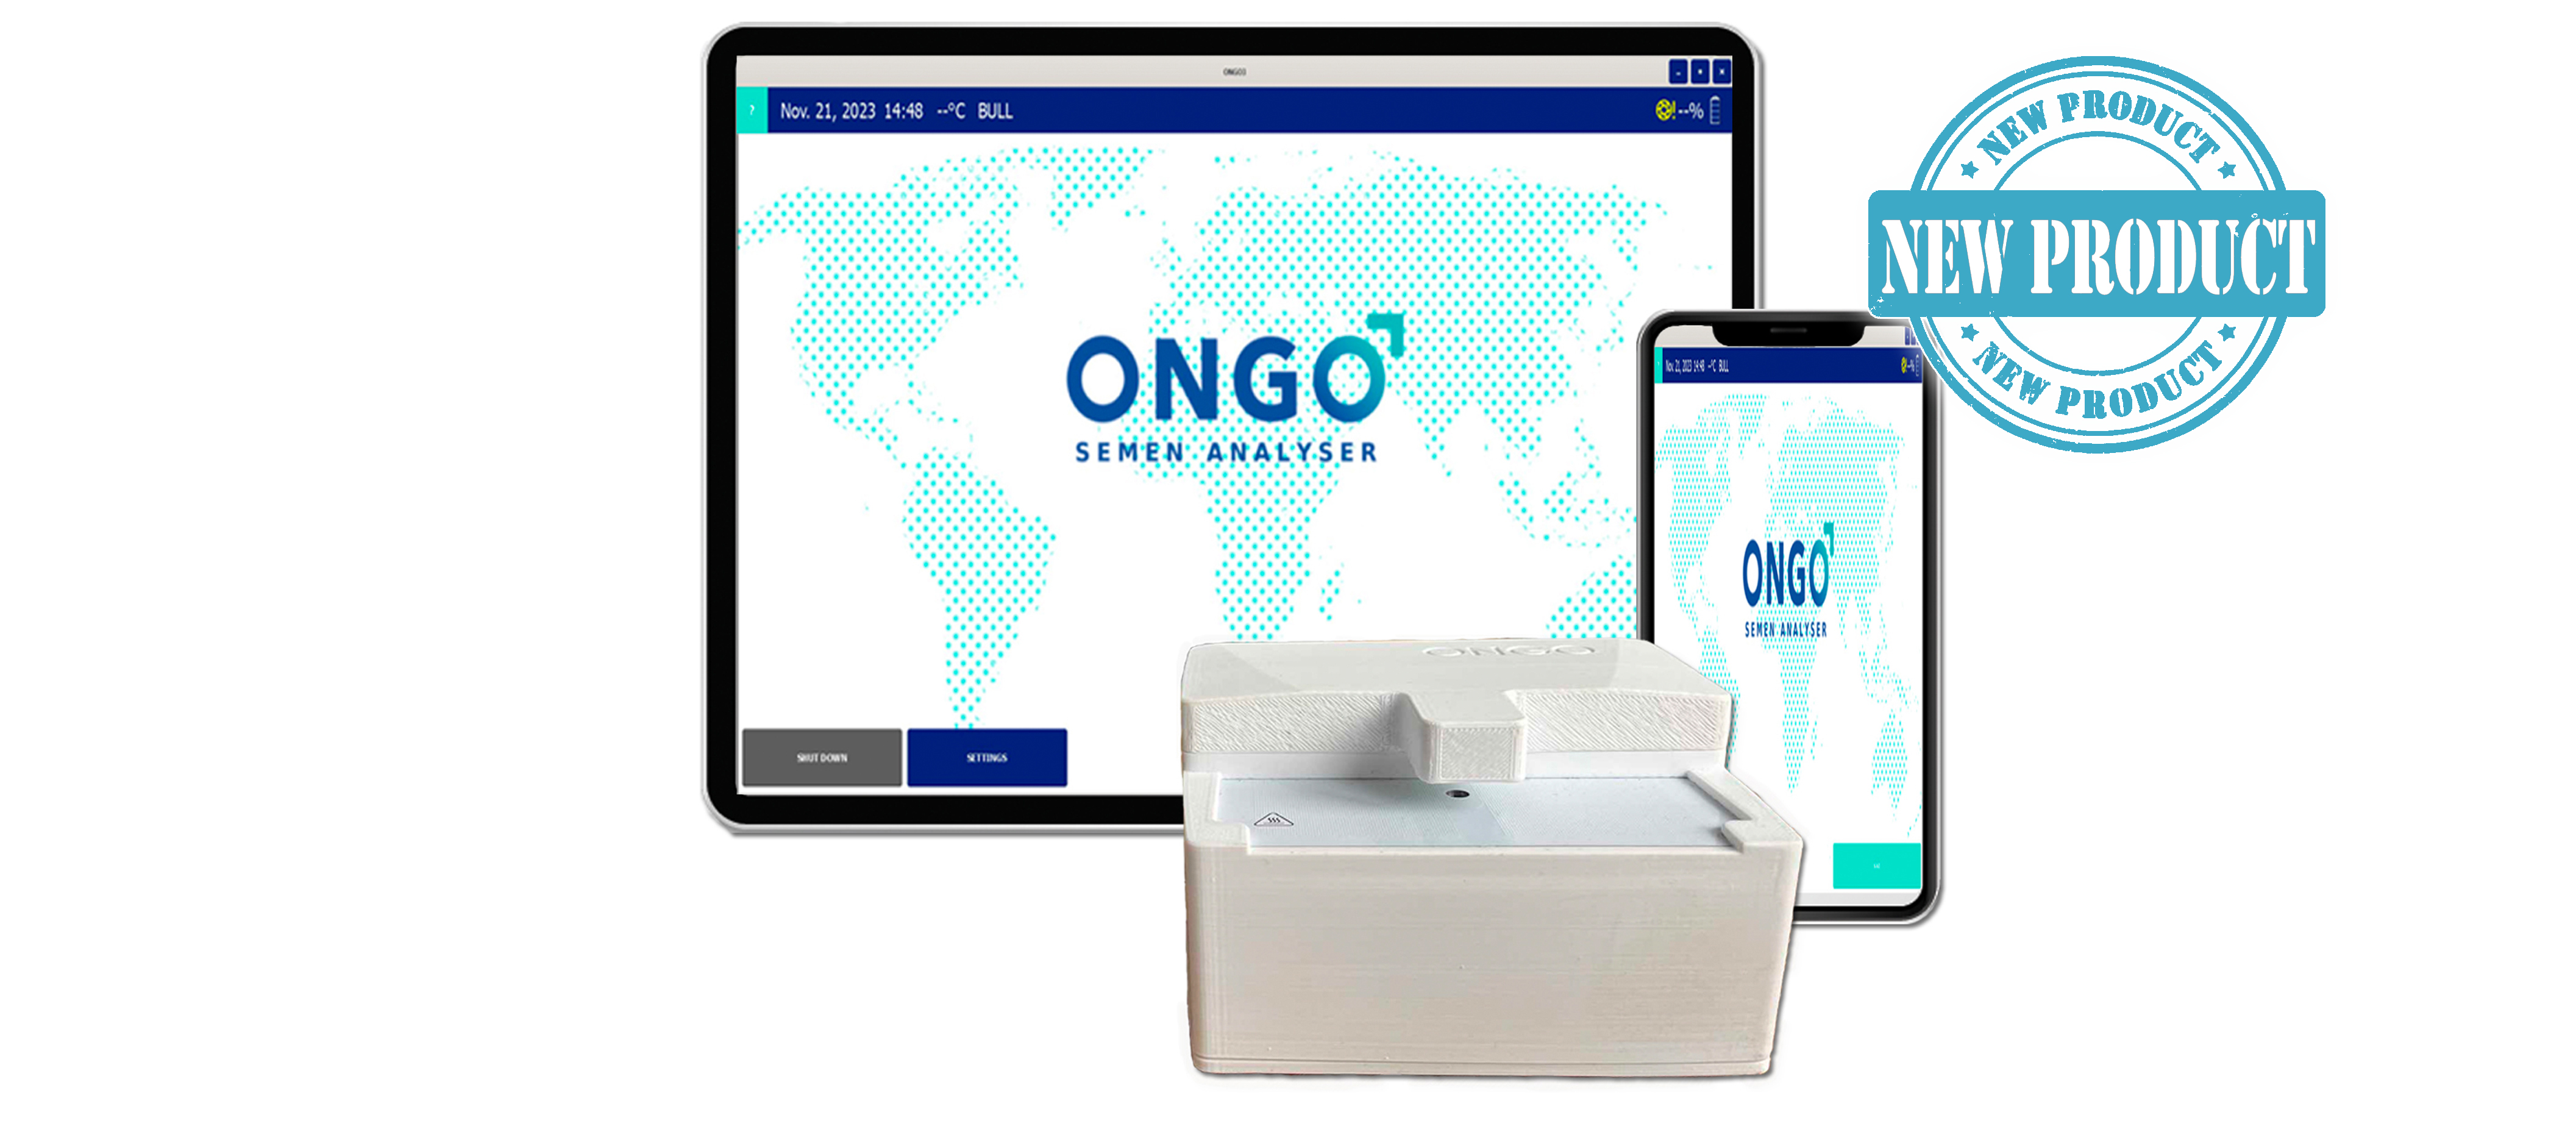 ONGO VISION - application based semen analysing unit from www.ongovettech.com - Fifth Slide